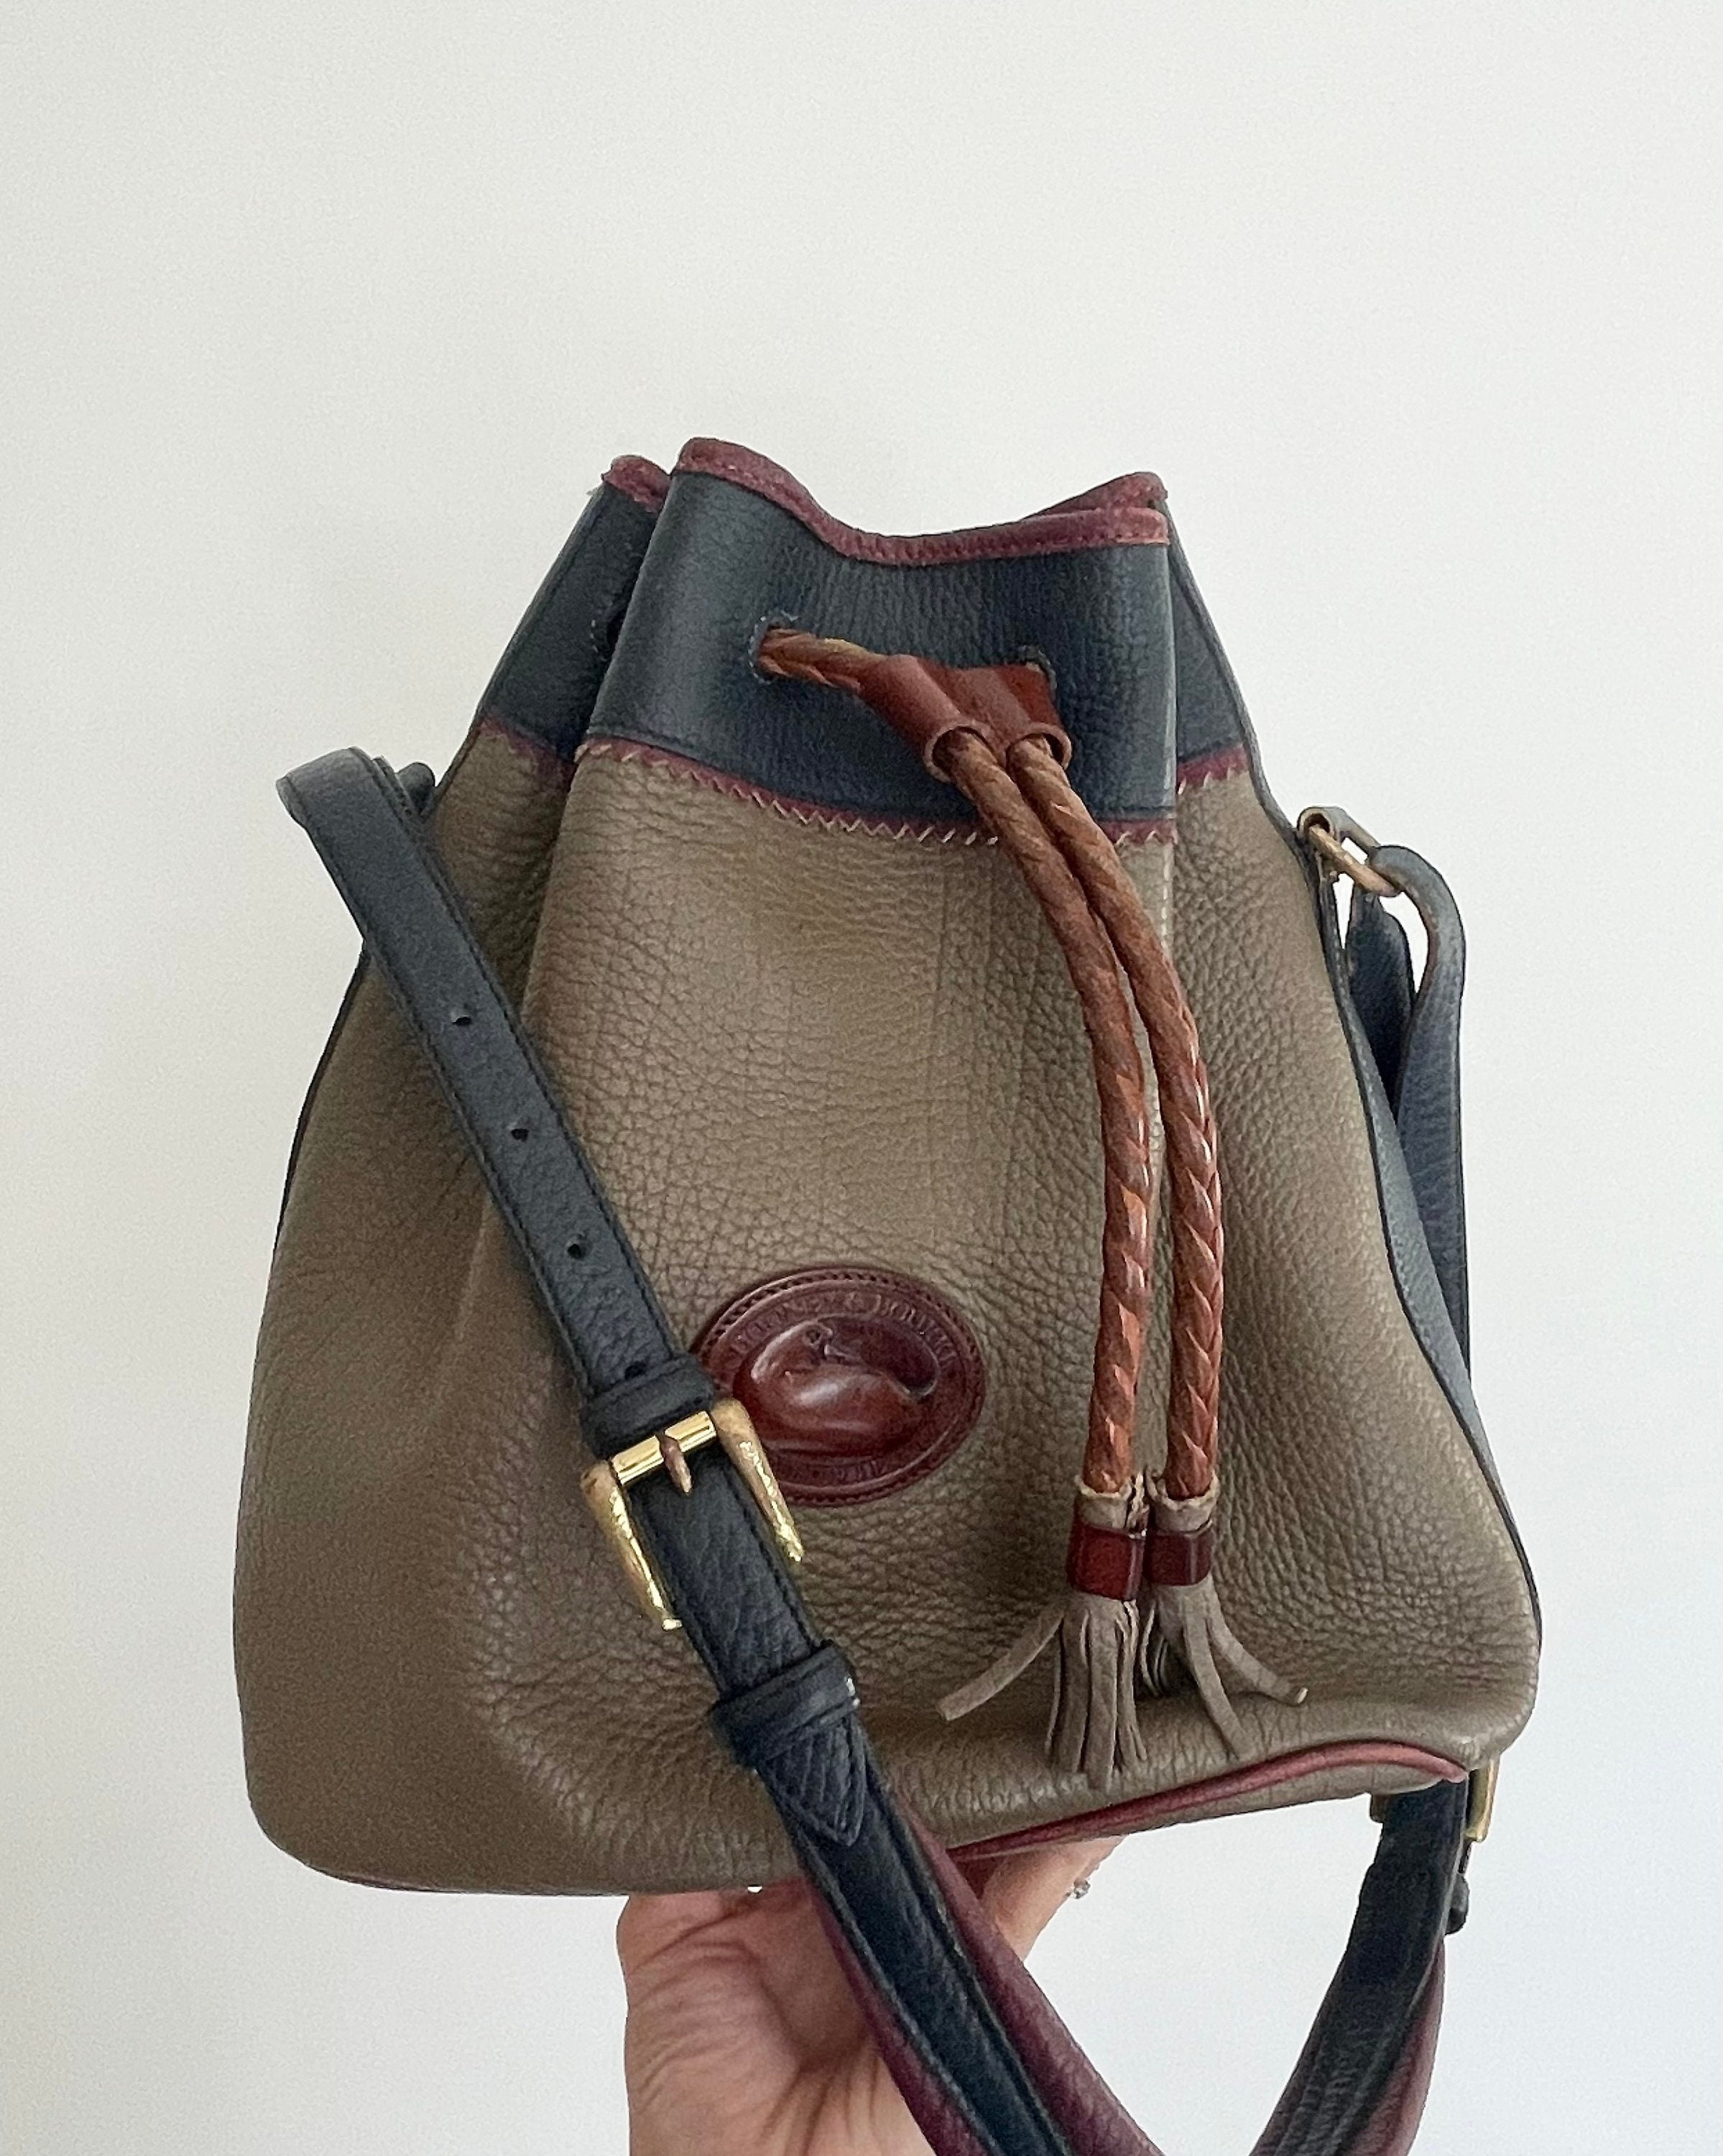 Dooney and Bourke real or fake : r/poshmark